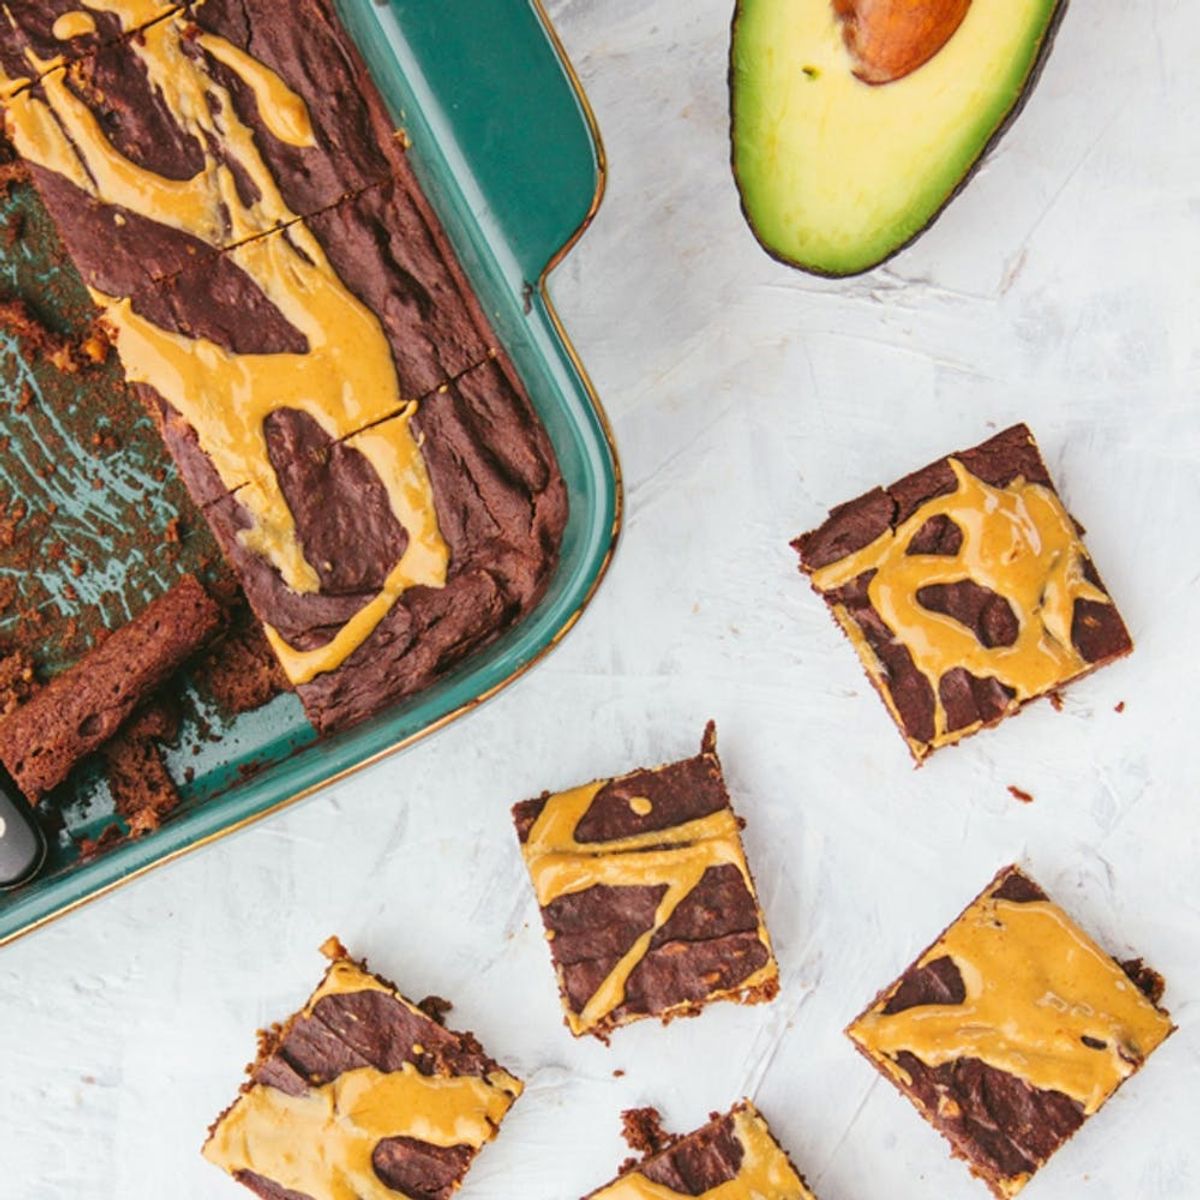 5 Healthy Chocolate Desserts You’ll Be Obsessed With